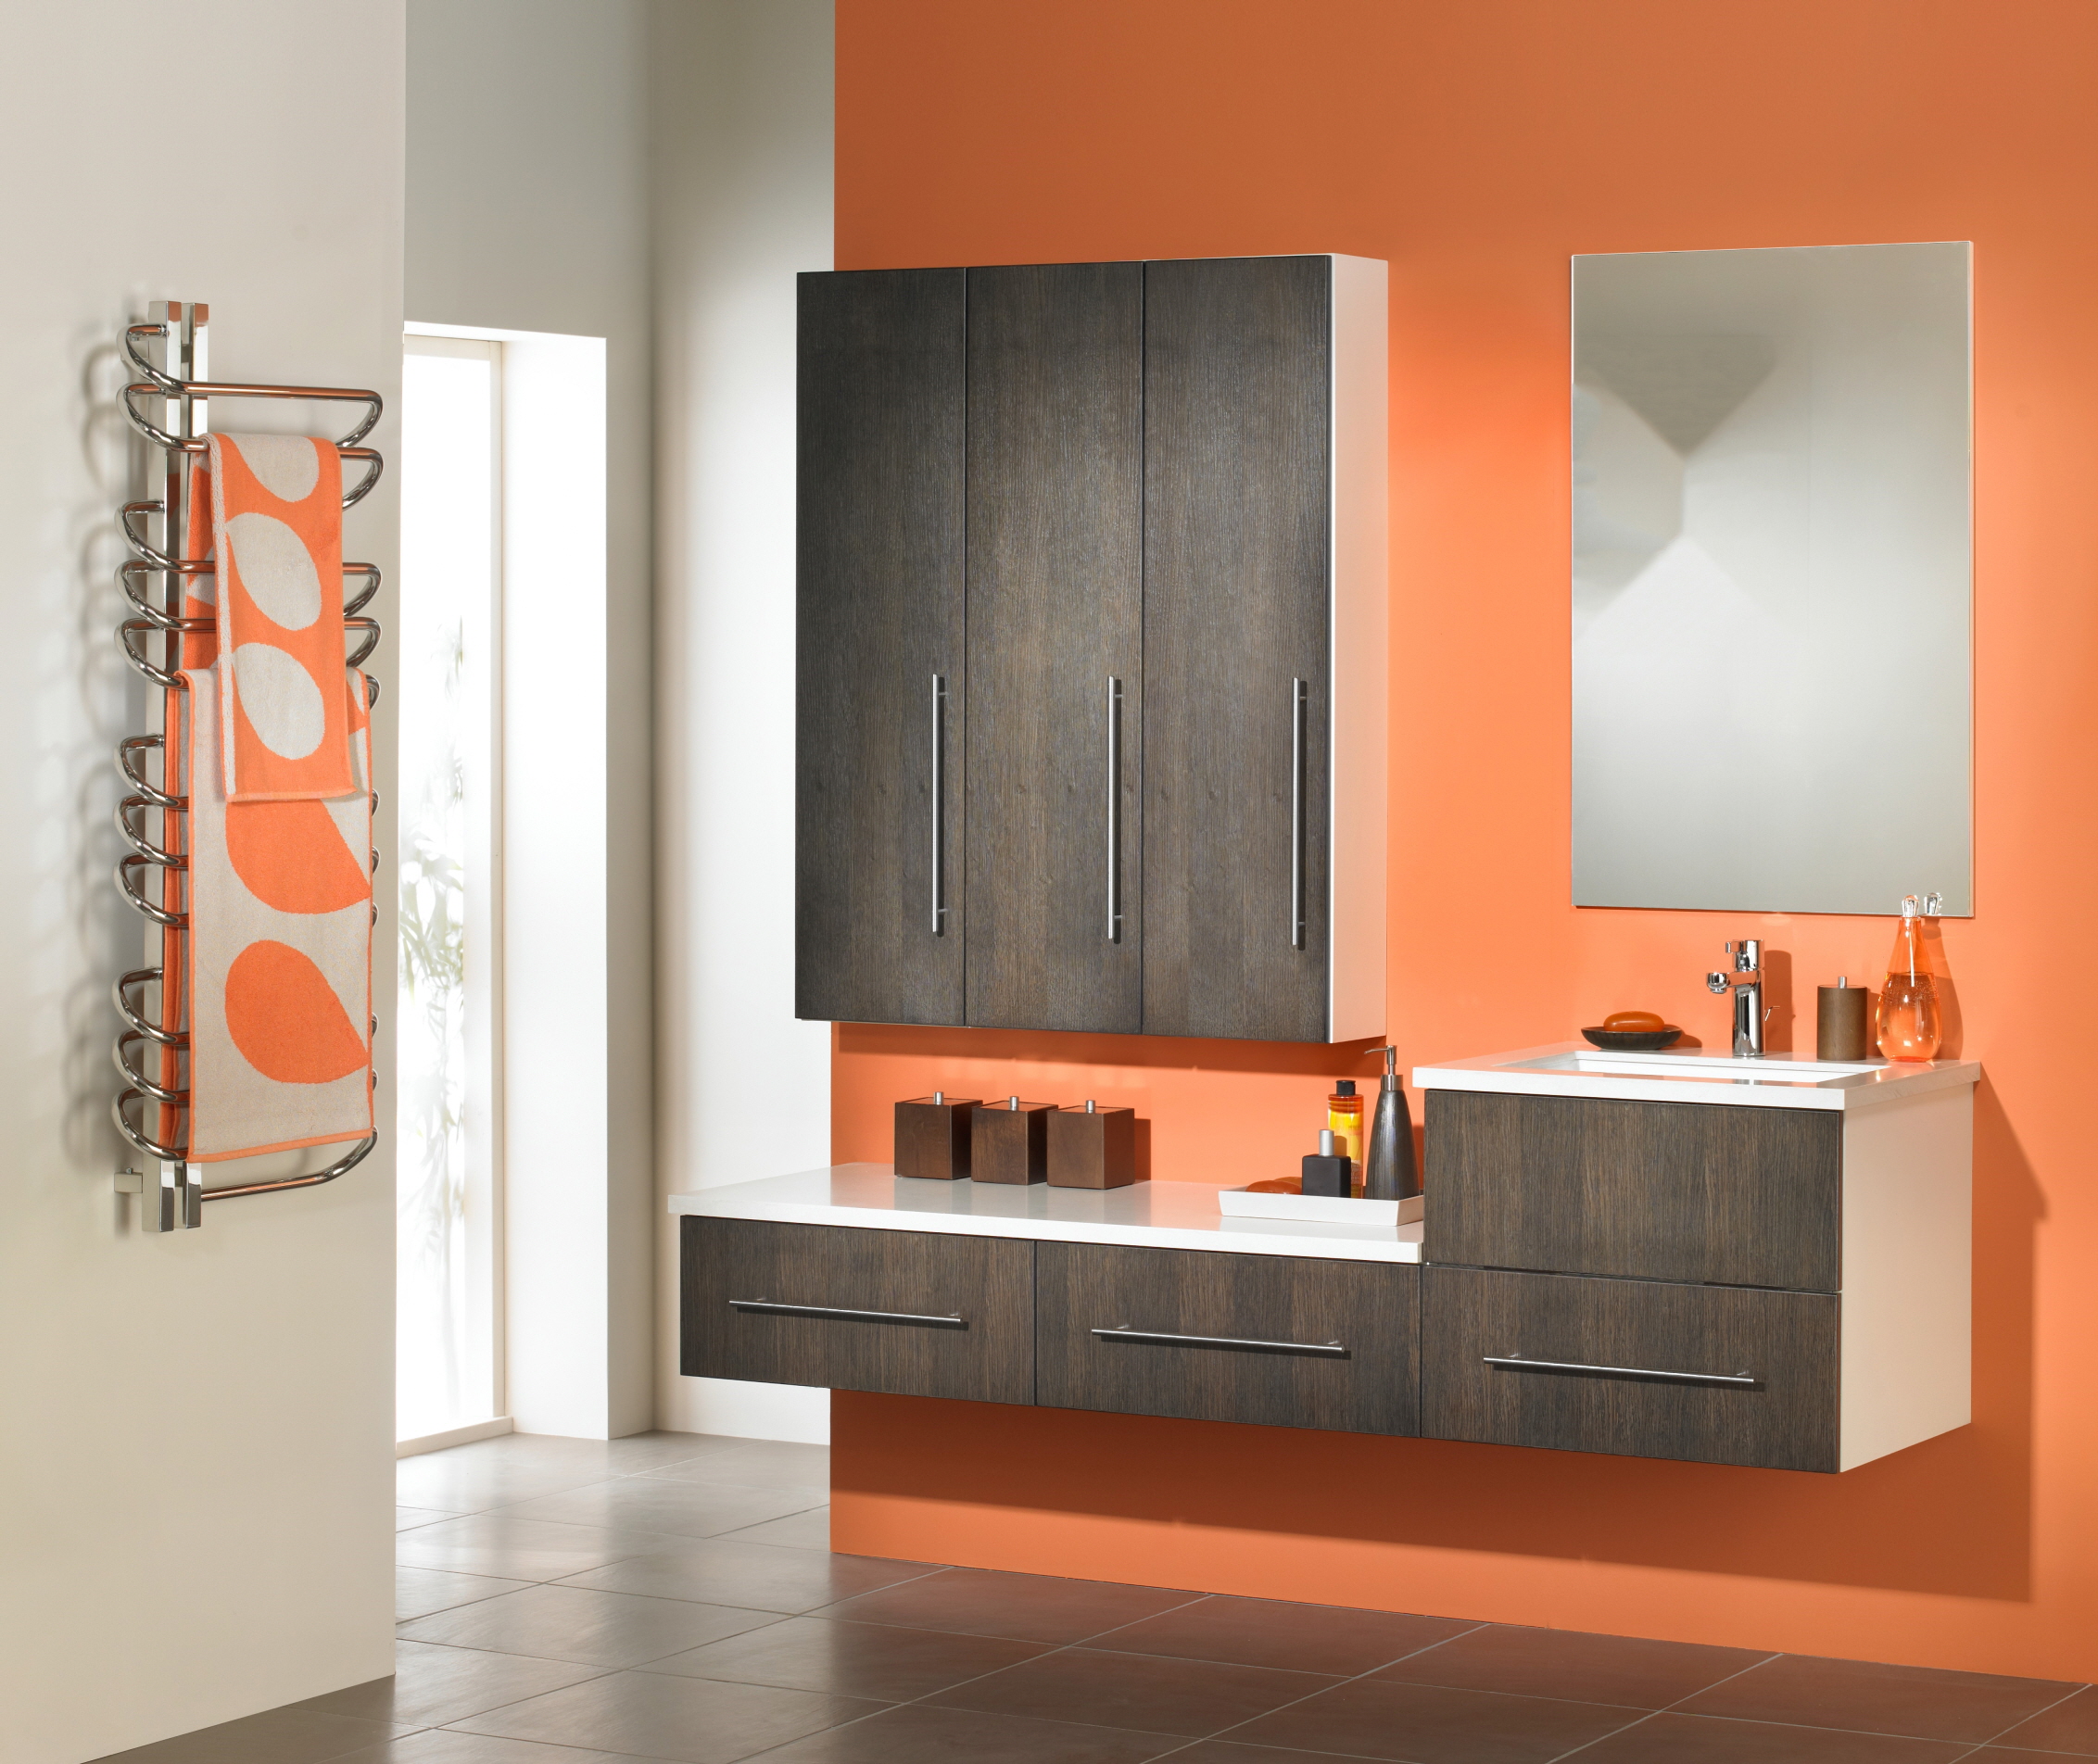 Daring Orange adds boldness and energy to the bathroom, creating a lively and dynamic ambiance.